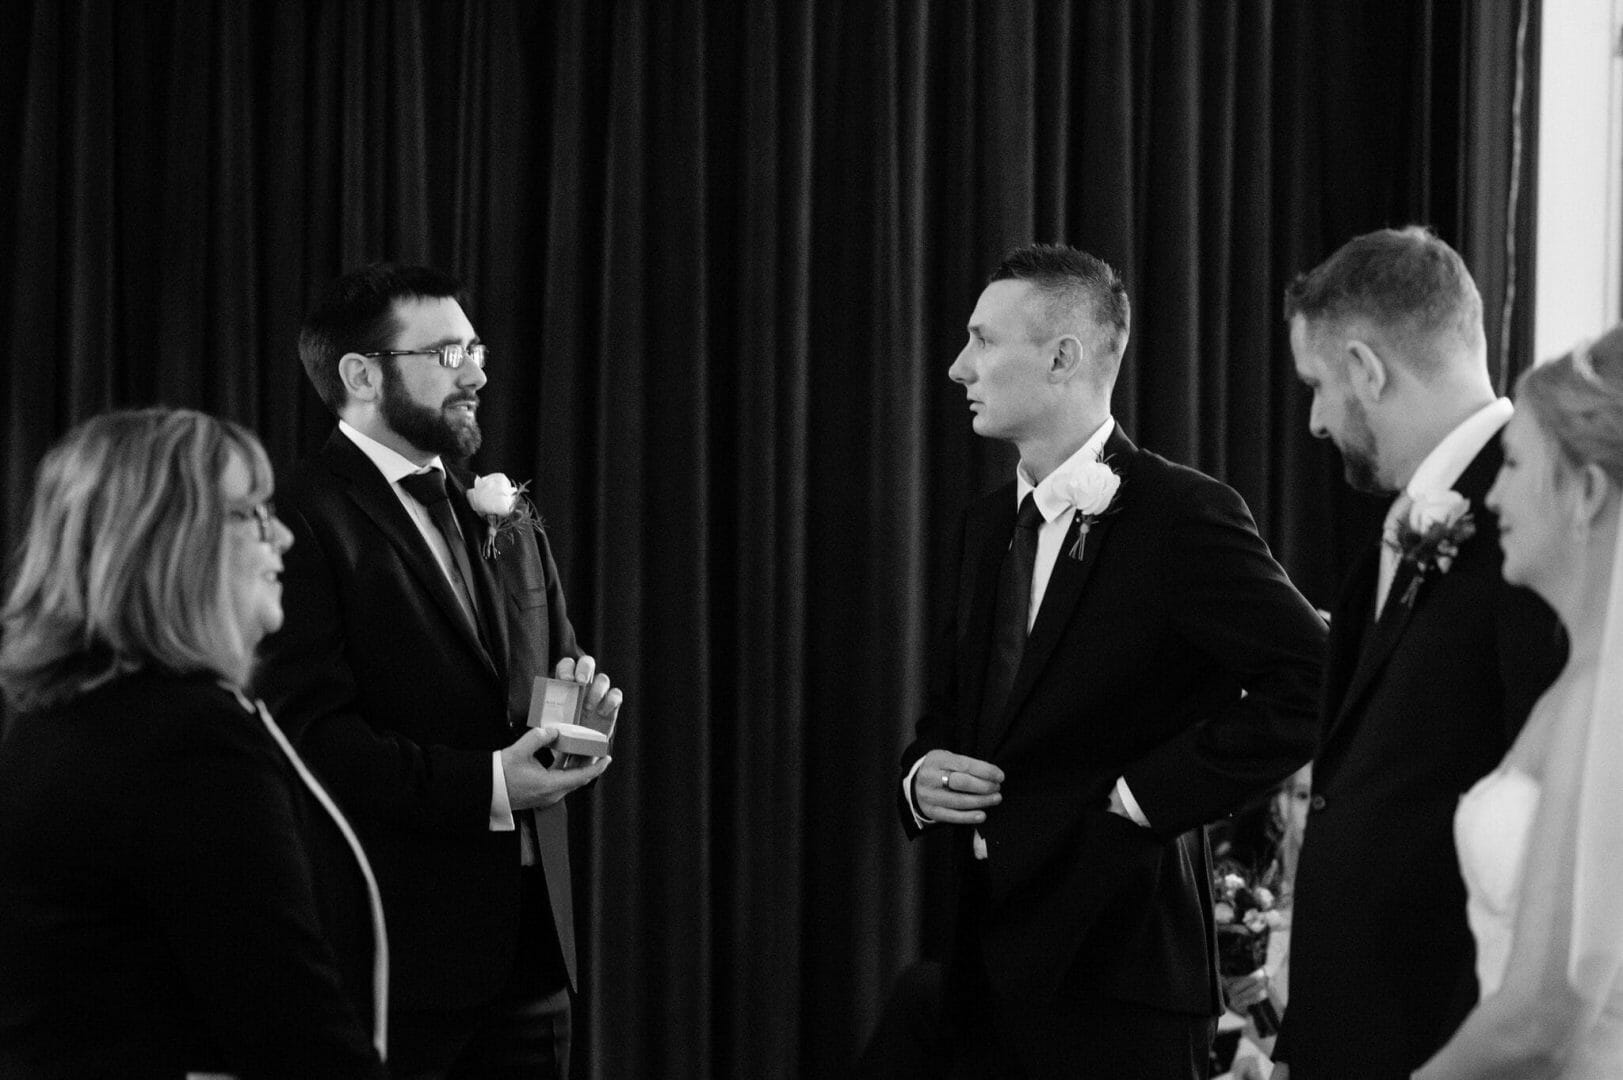 Best man opens an empty ring box during the wedding ceremony